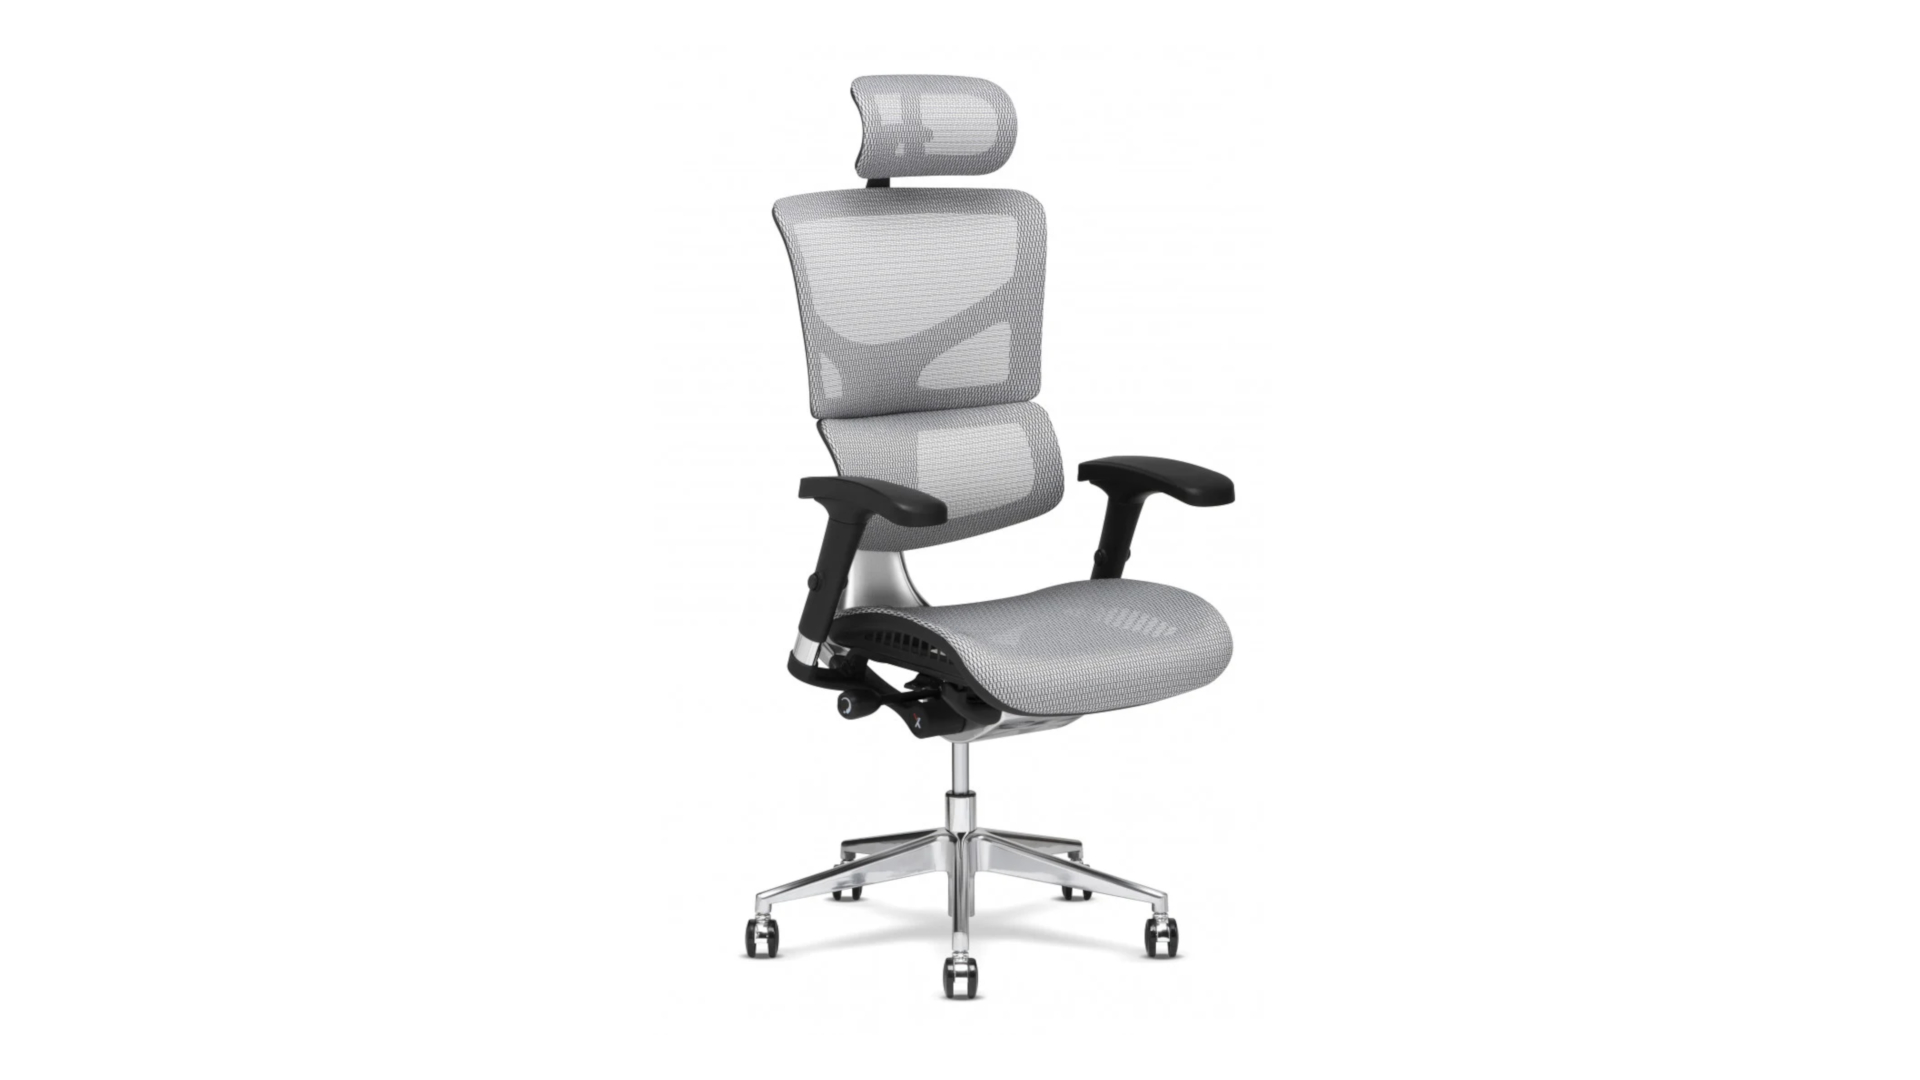 The best ergonomic chair, X-Chair, arm rests, wheels, neck rest, comfortable, lumbar support